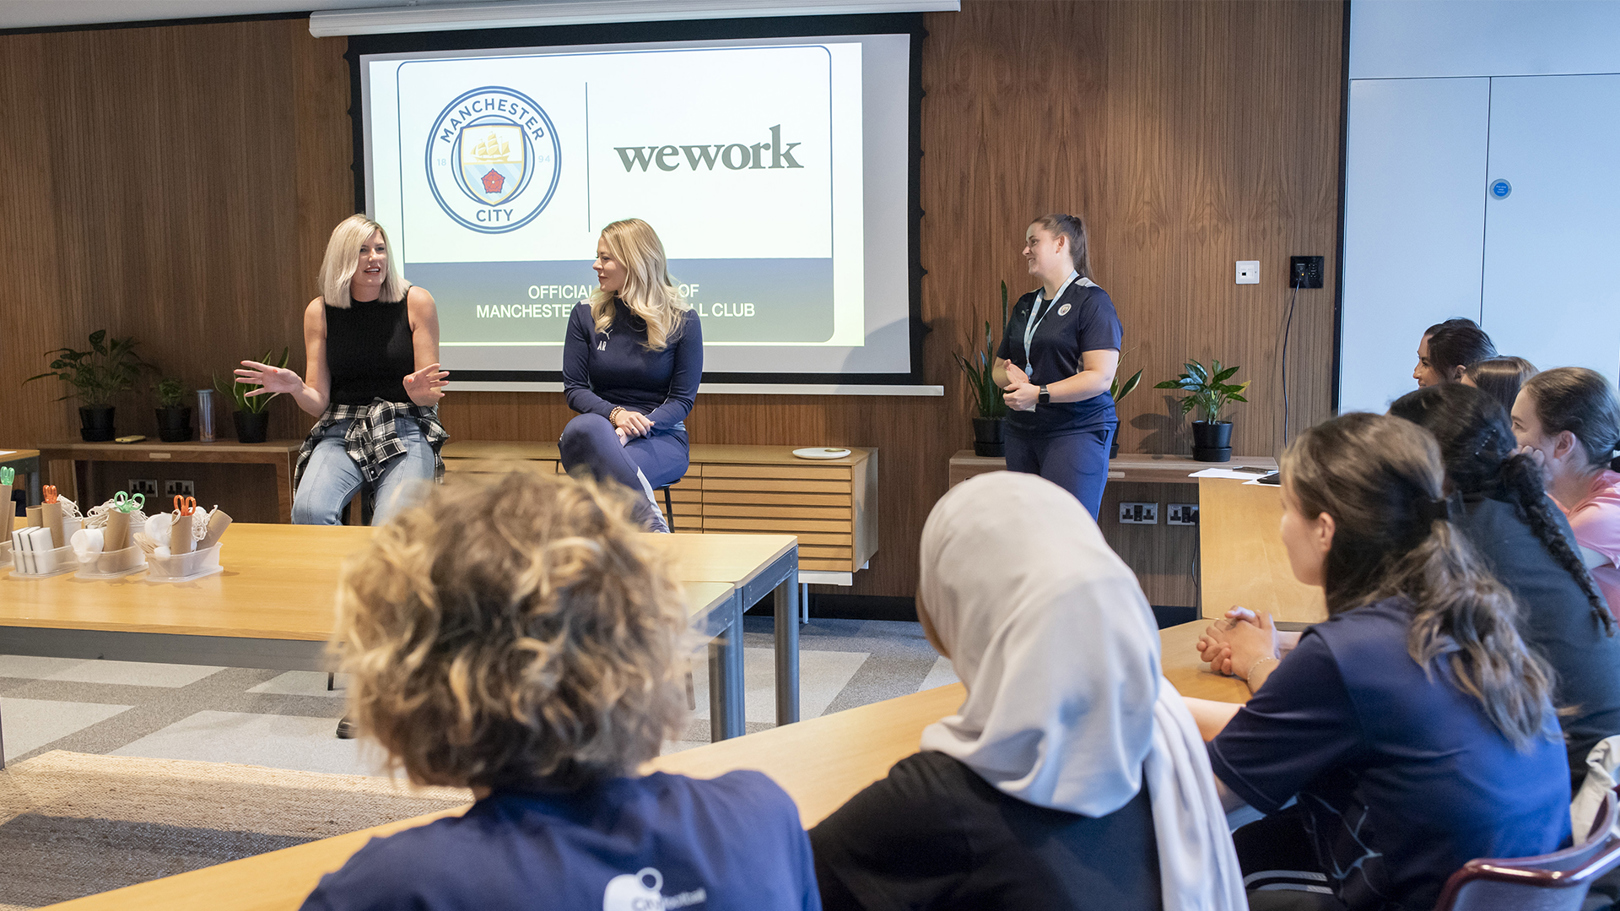 CITC collaborate with WeWork in new Young Leaders workspace